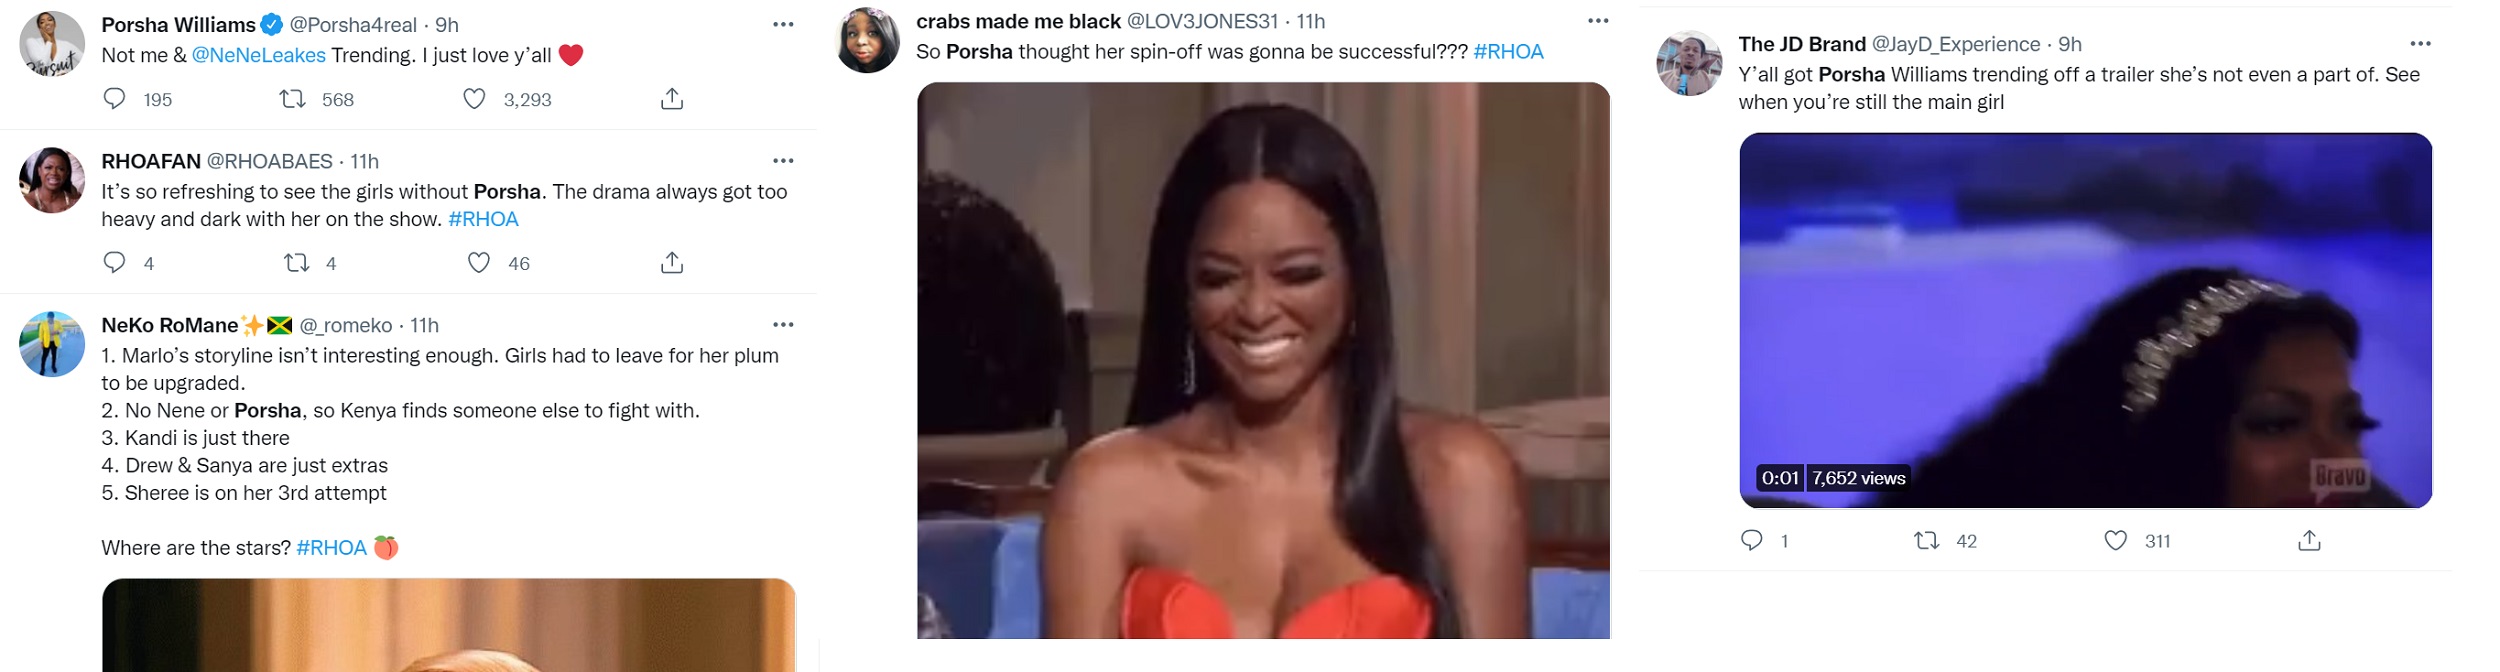 Porsha Williams trends on Twitter for not being on RHOA this season